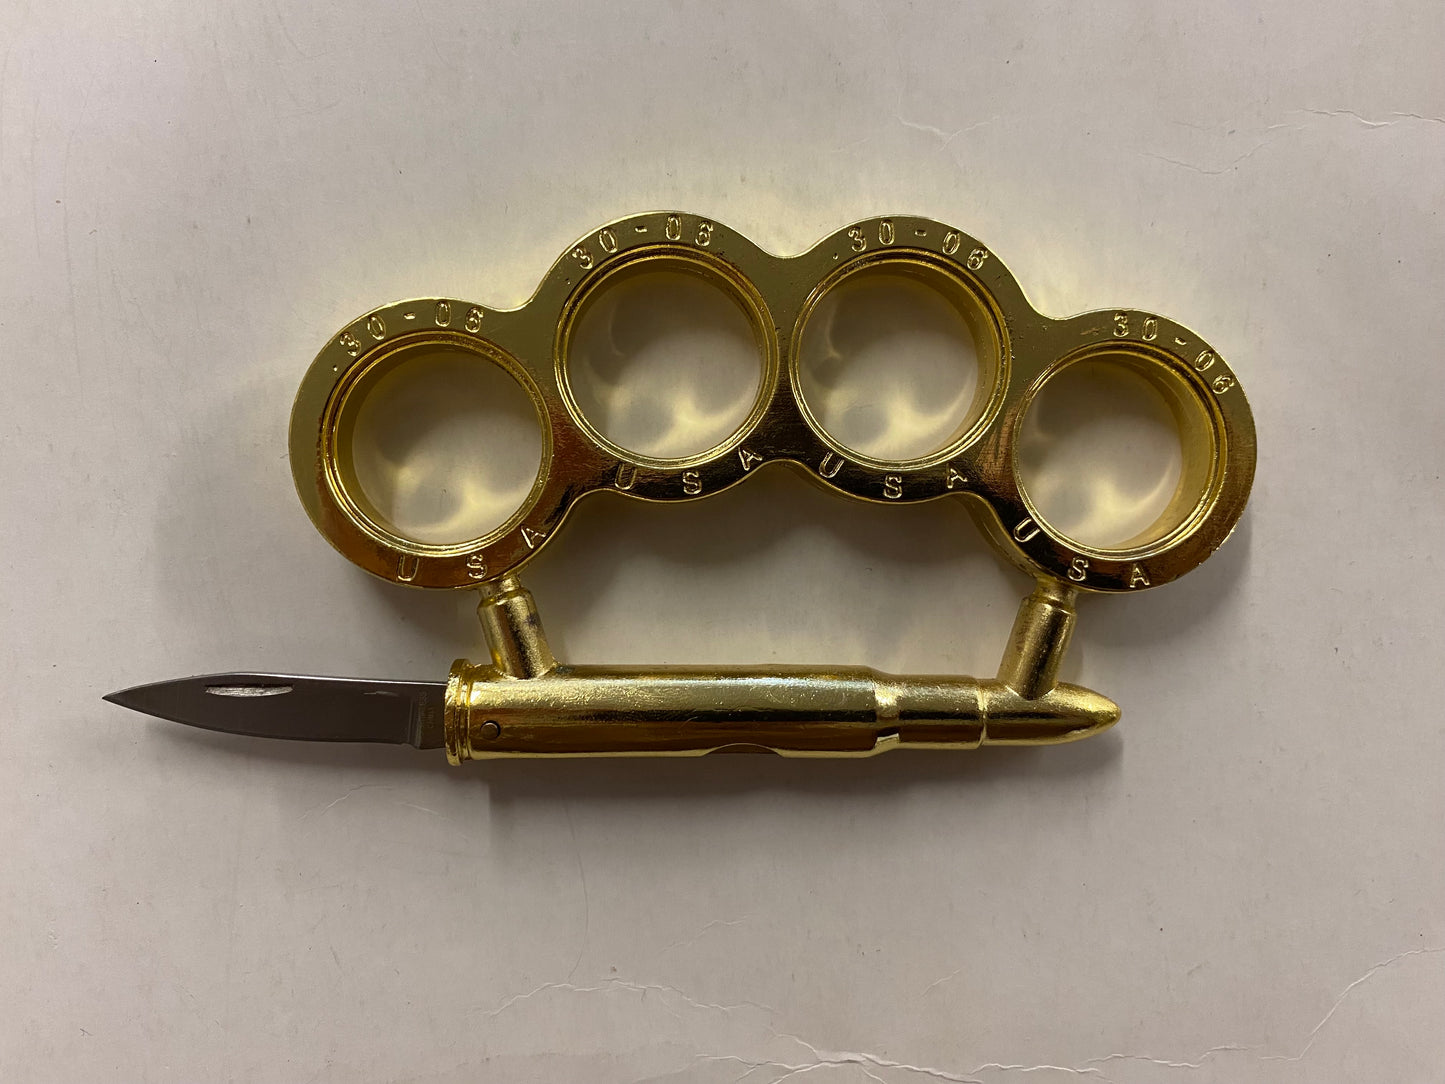 Brass Knuckles with Knife